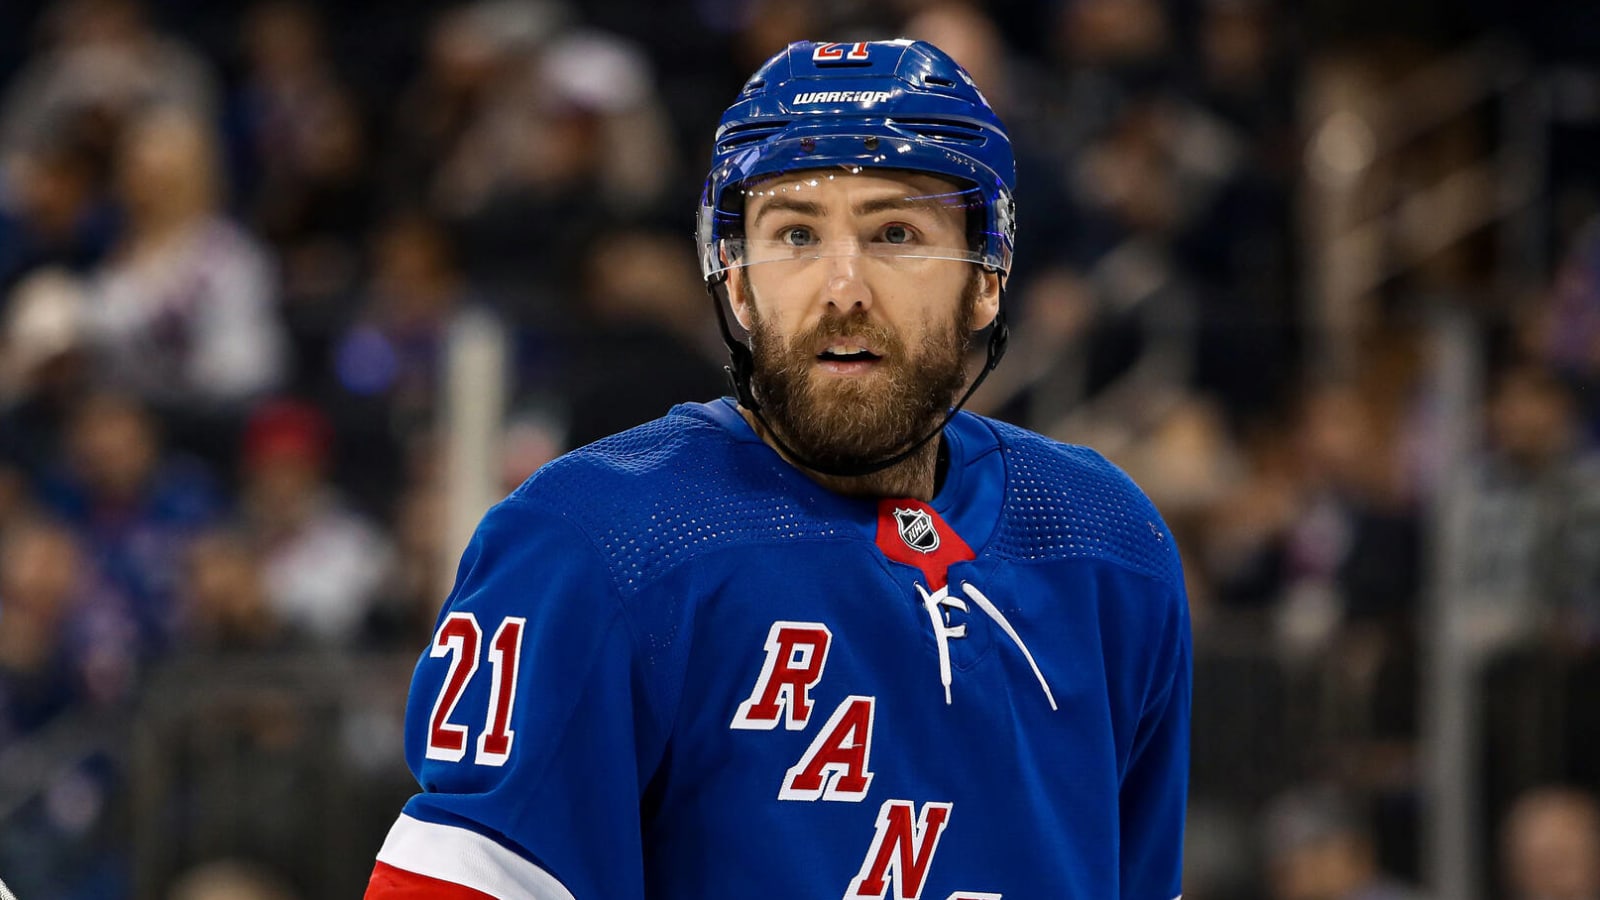 Rangers are gauging interest in two-time Stanley Cup champion